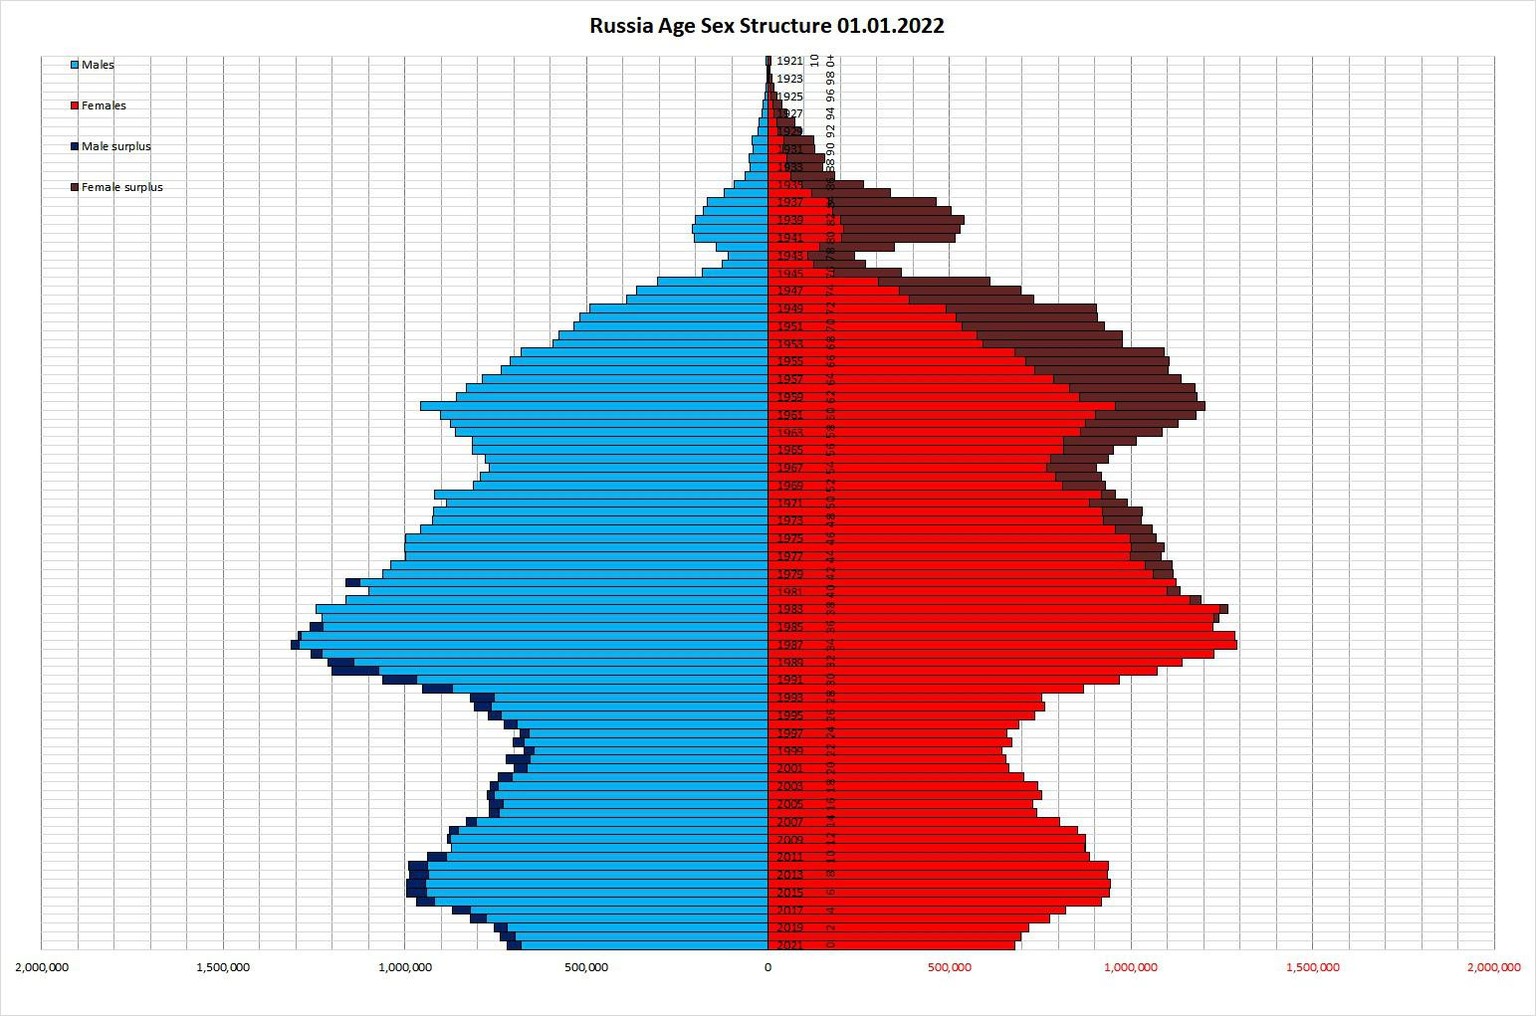 Bevölkerungspyramide Russland, 1.1.2022
https://en.wikipedia.org/wiki/Demographics_of_Russia#/media/File:Russian_population_(demographic)_pyramid_(structure)_on_January,_1st,_2022.png